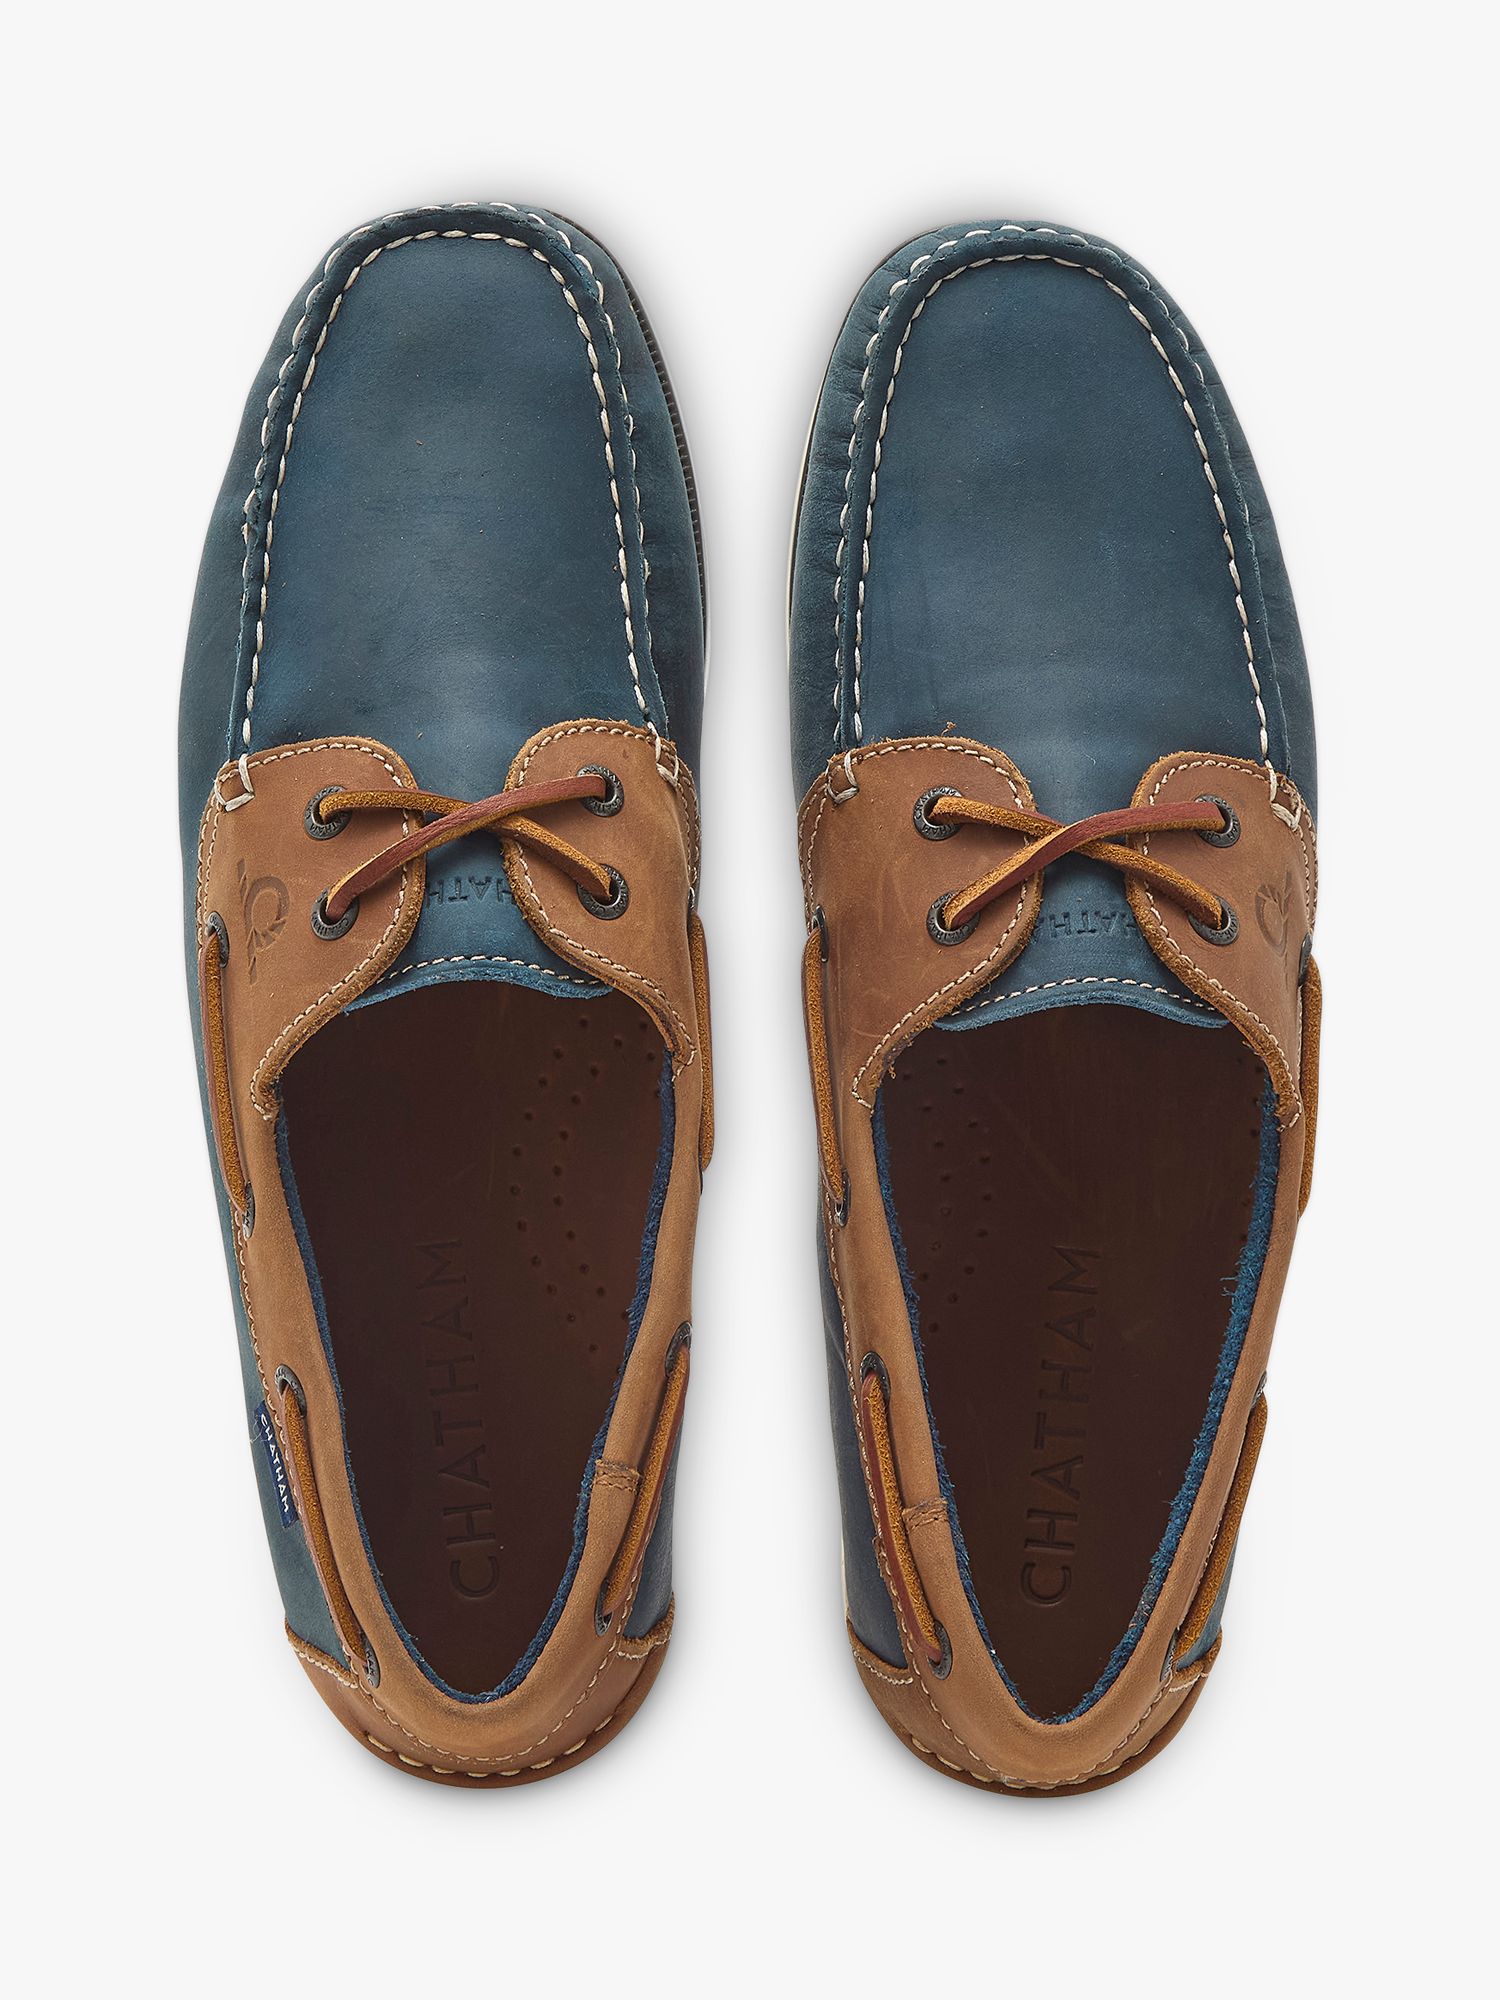 Chatham Whitstable Leather Boat Shoes, Navy/Tan, 7